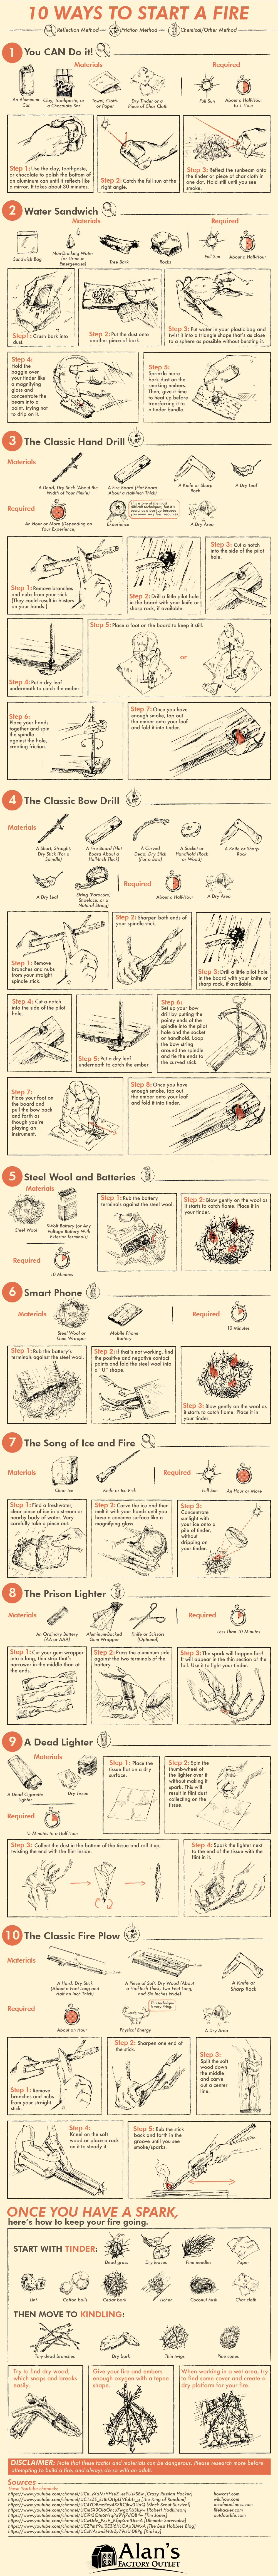 10 Ways to Start a Fire Without Matches #Infographic